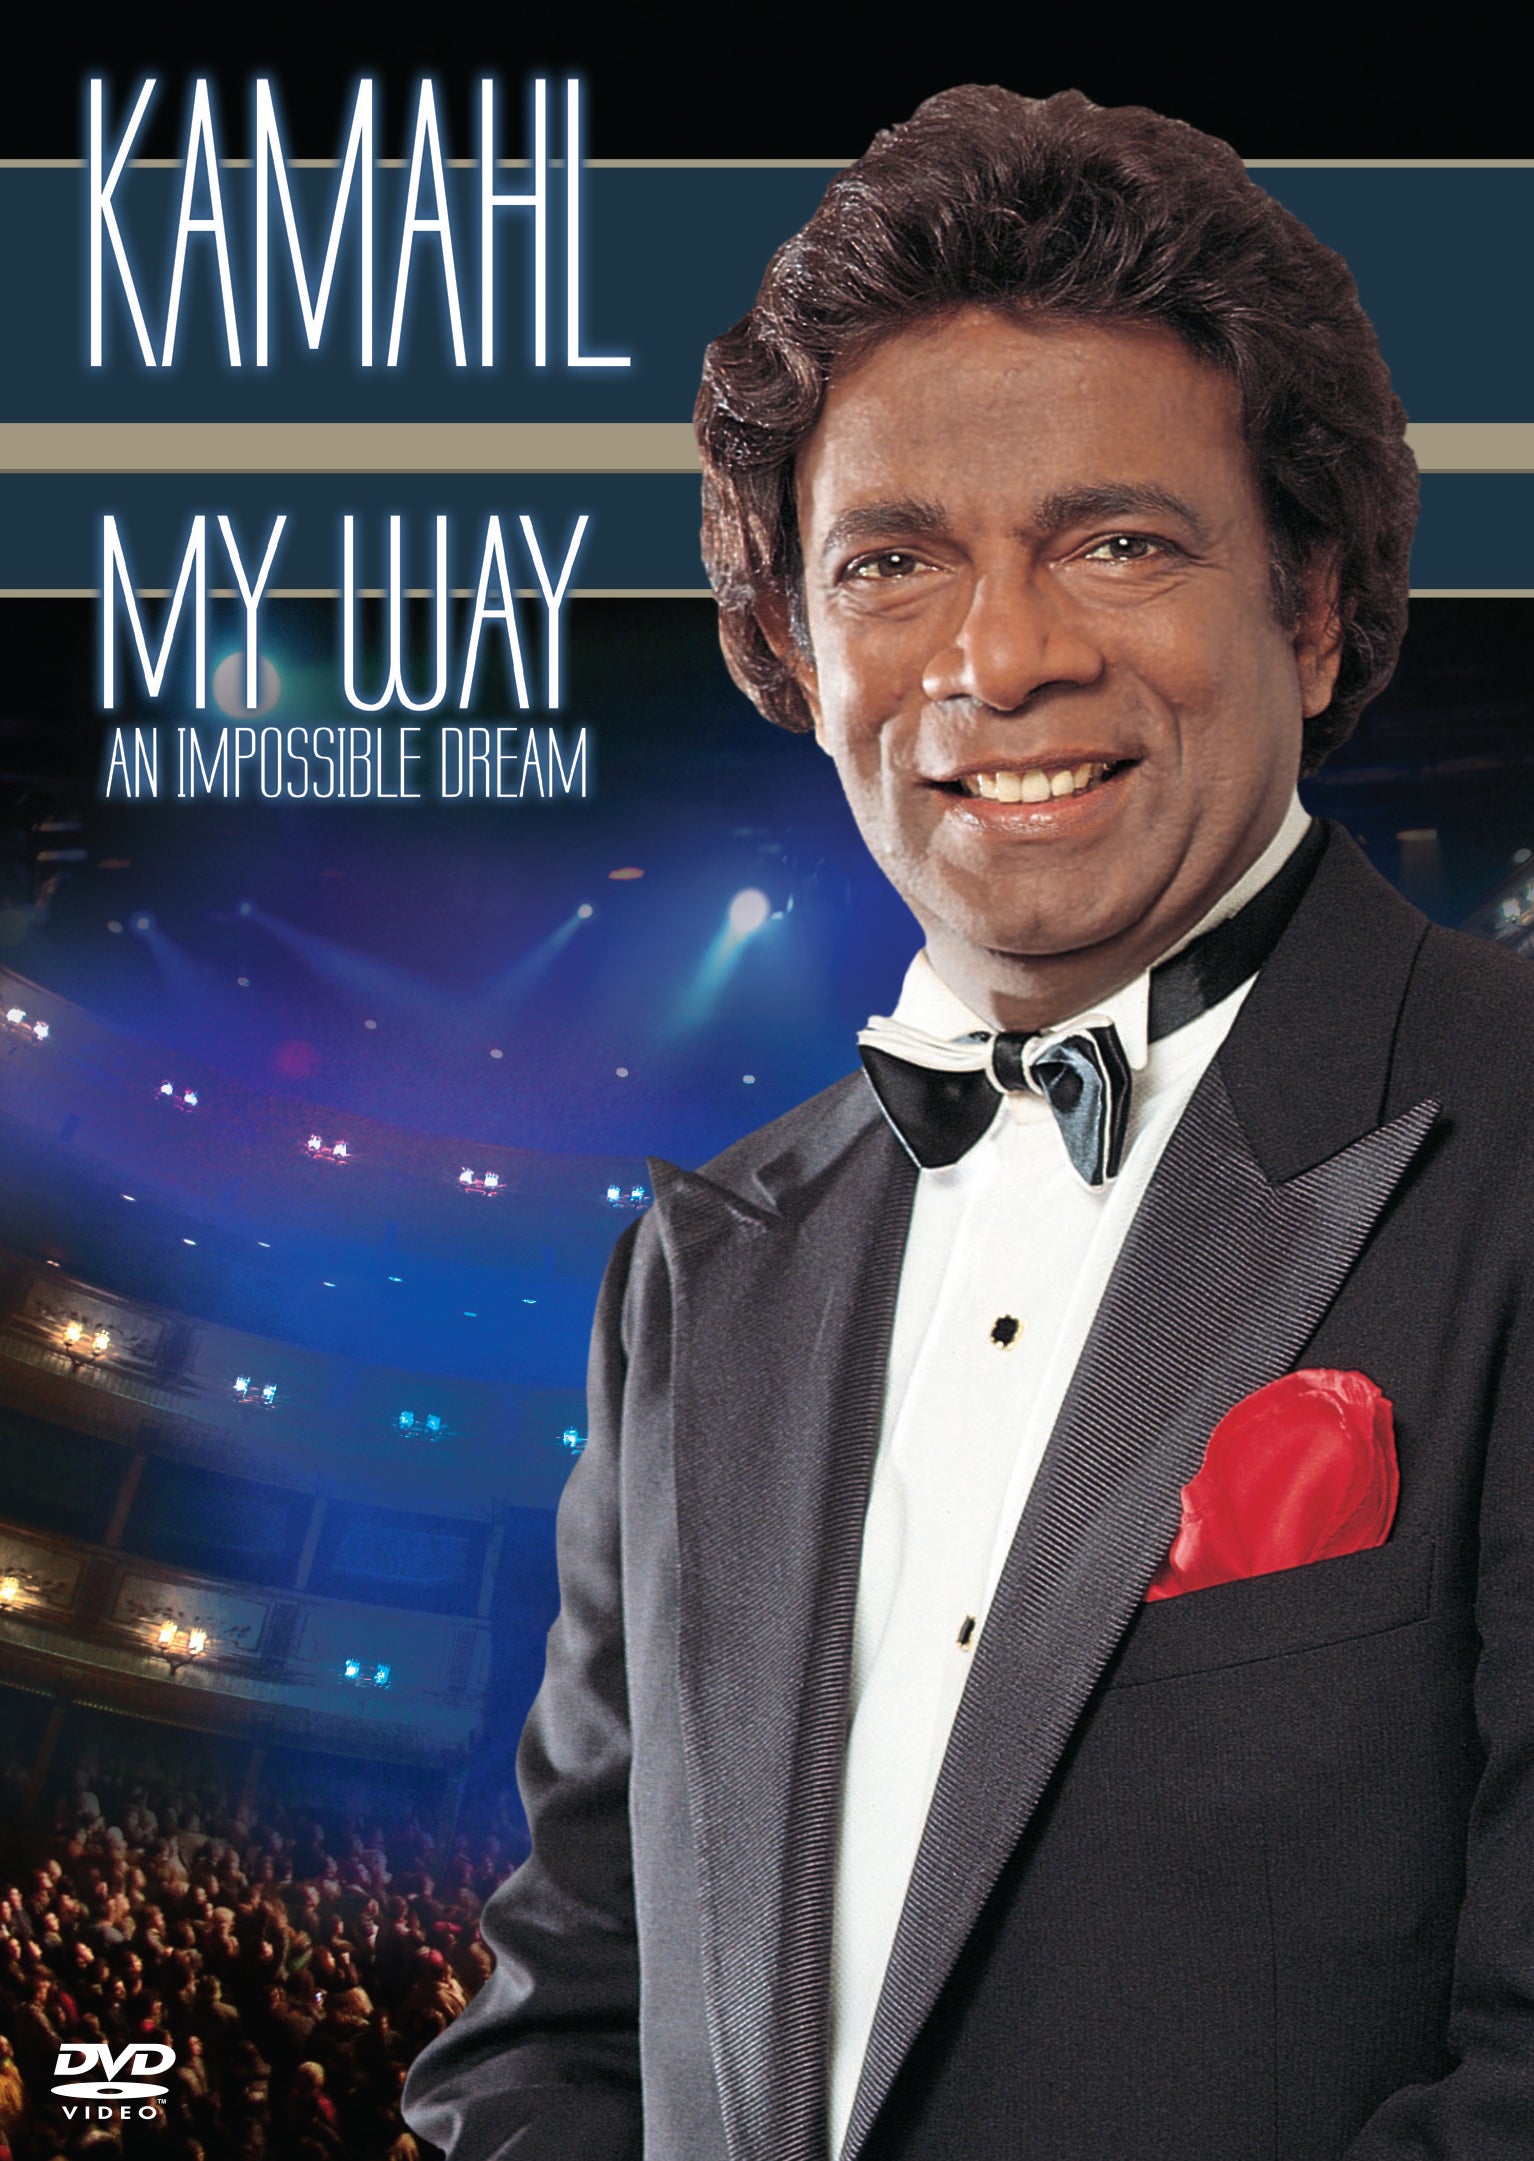 KAMAHL - MY WAY (AN IMPOSSIBLE DREAM)